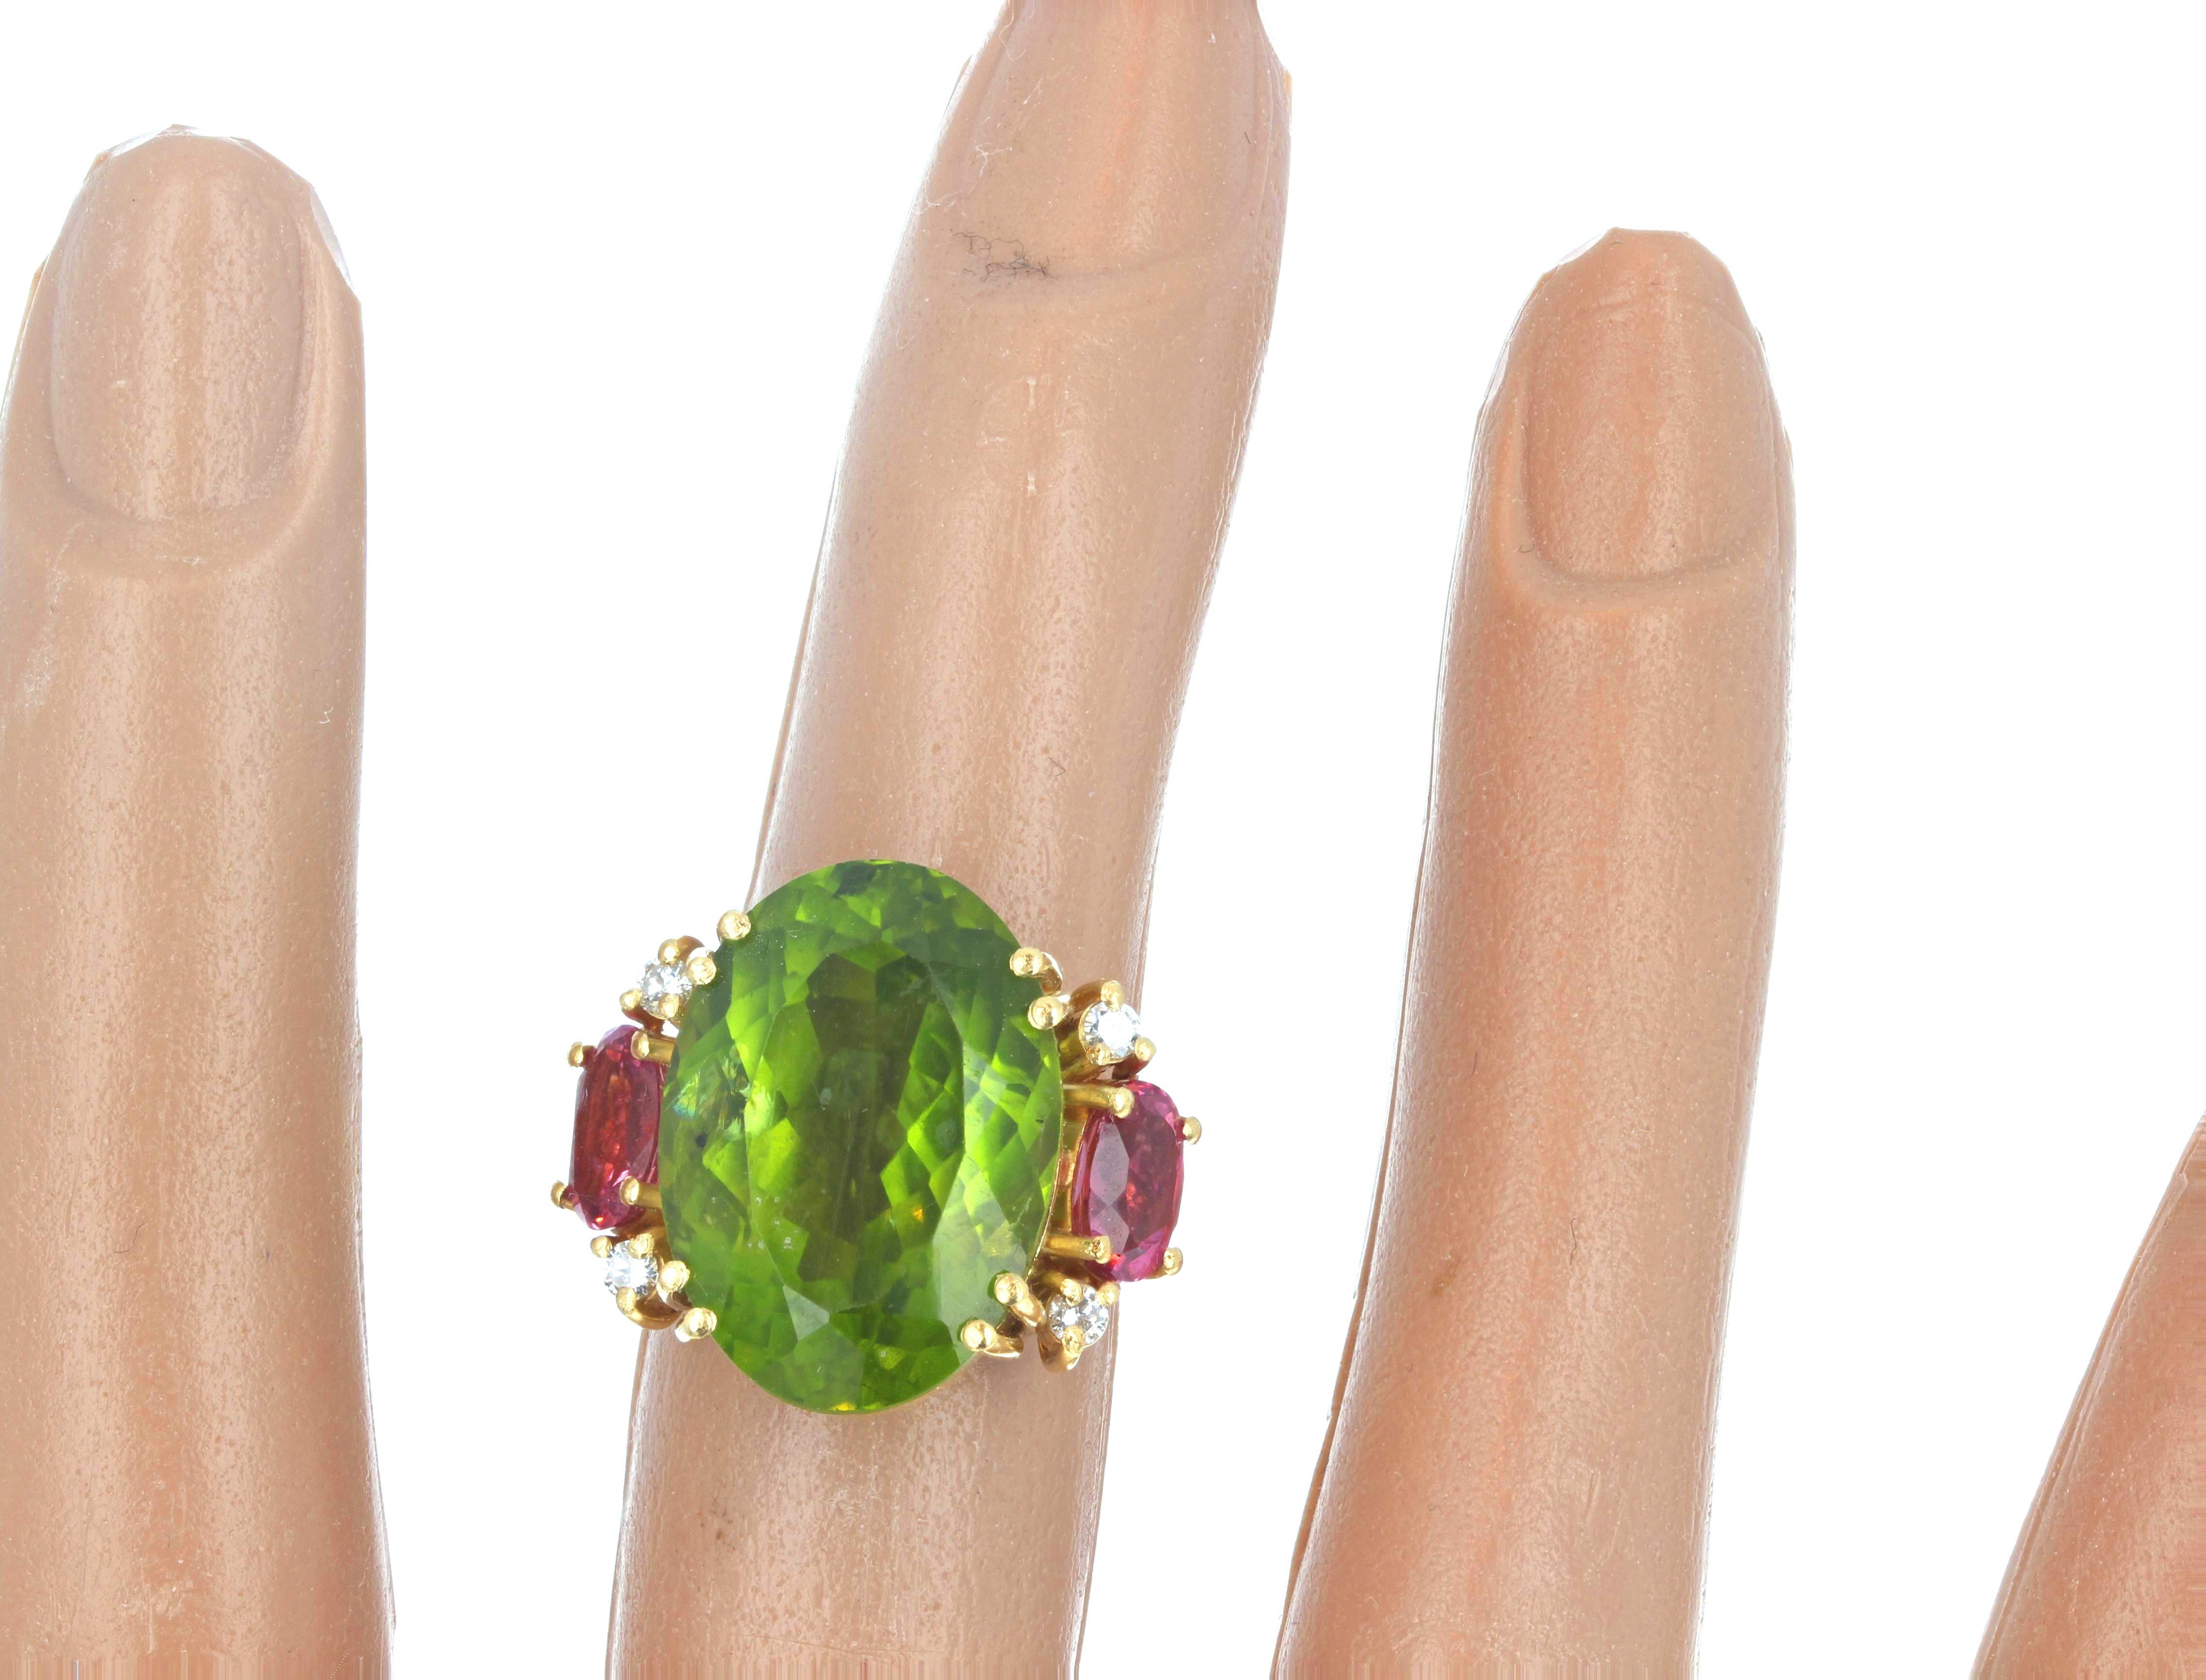 AJD Magnificent Brilliant 14 Ct Green&Pink Tourmalines, Diamonds 18Kt Gold Ring For Sale 3